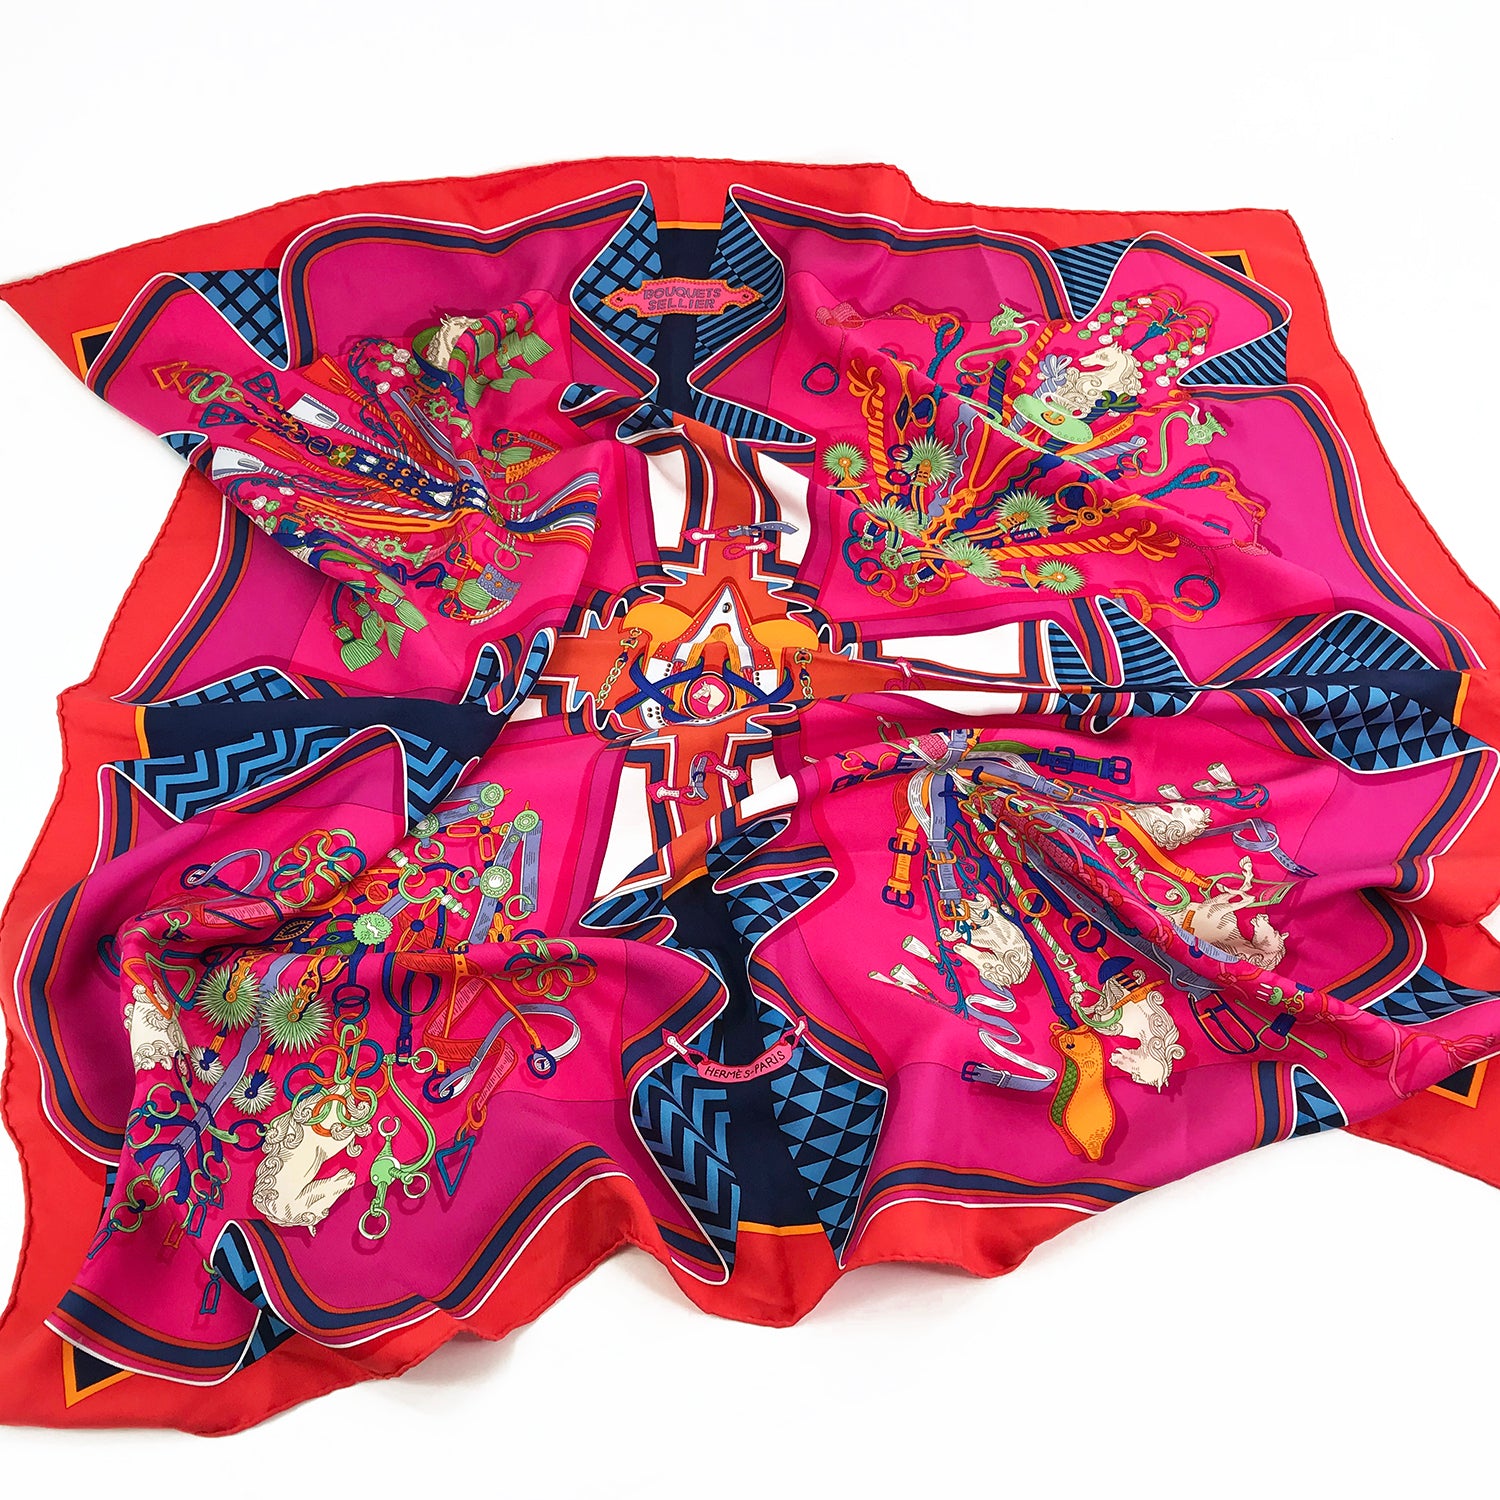 How the Hermes scarf has become one of the world's most